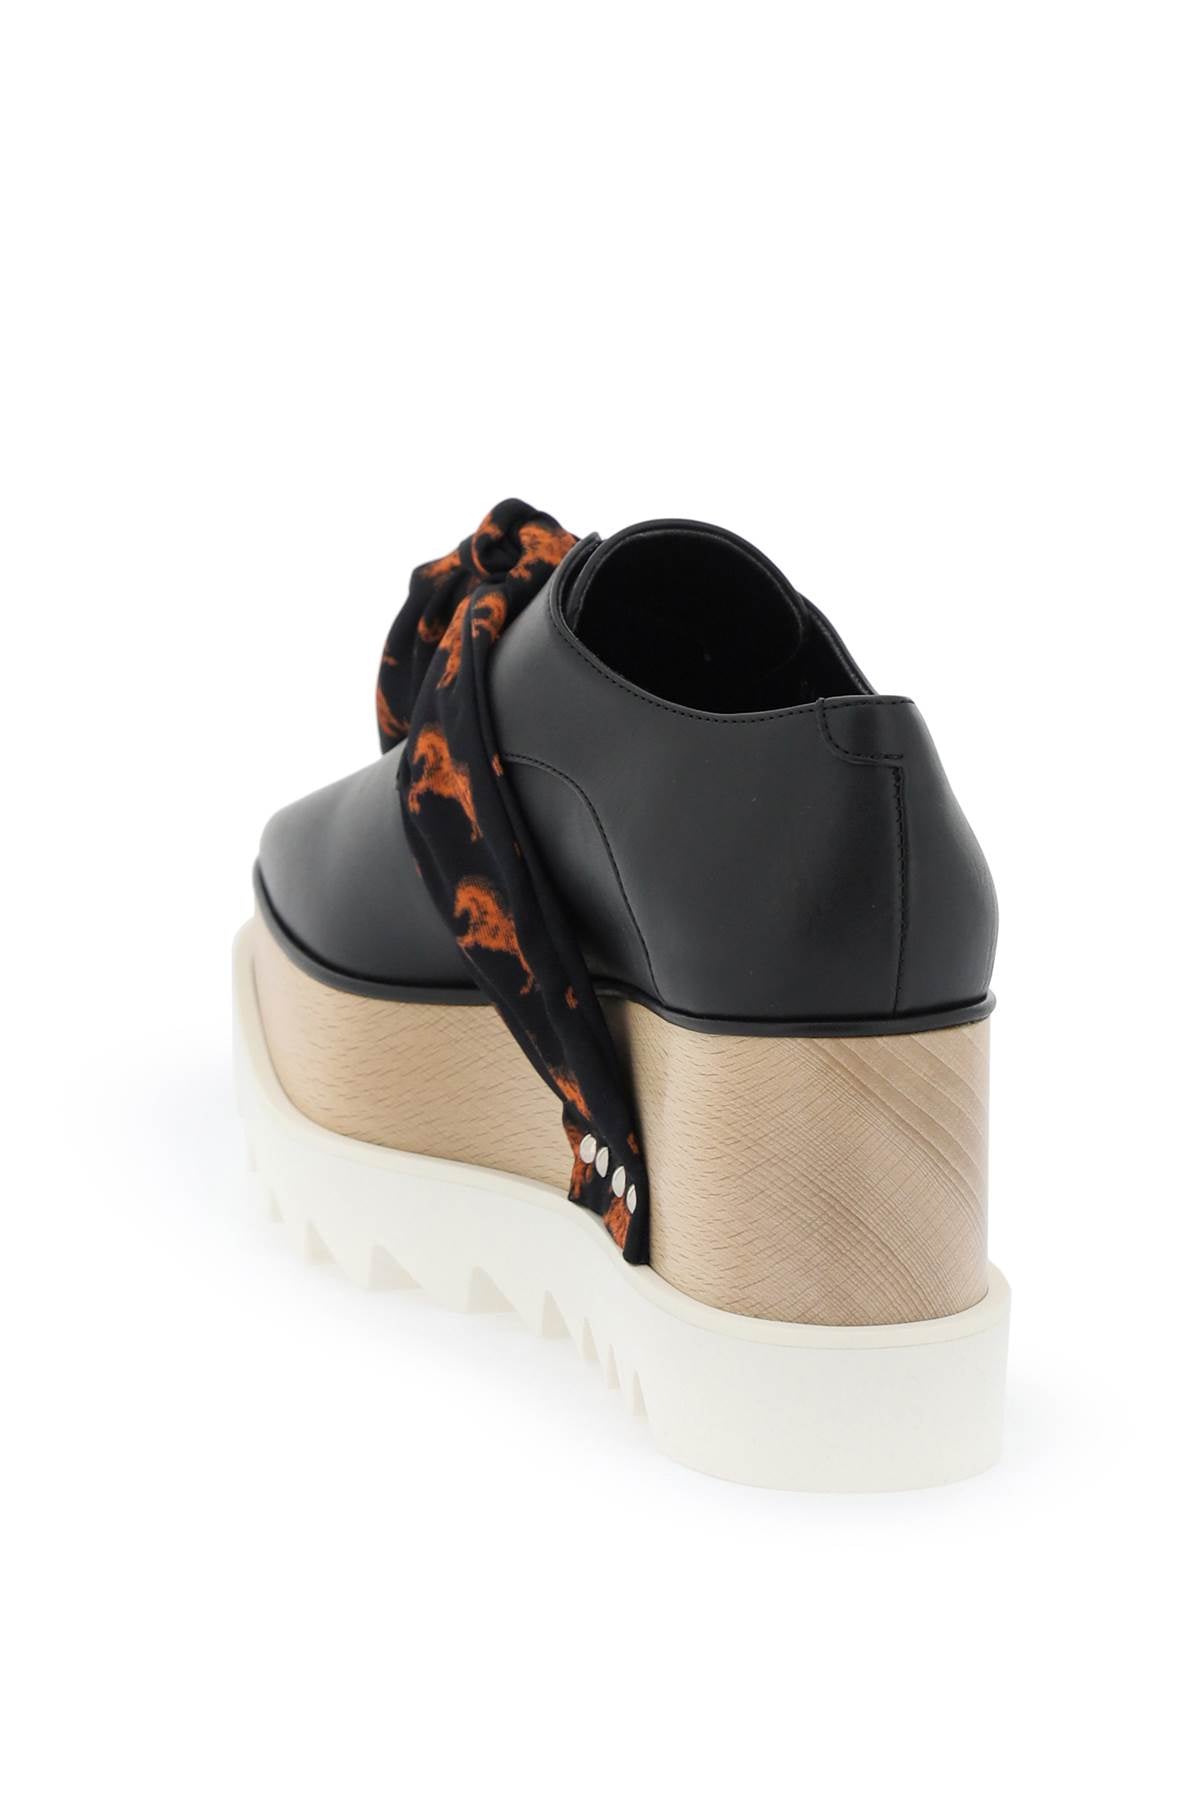 STELLA MCCARTNEY Black Platform Loafers with Eco-Friendly Viscose Band for Women